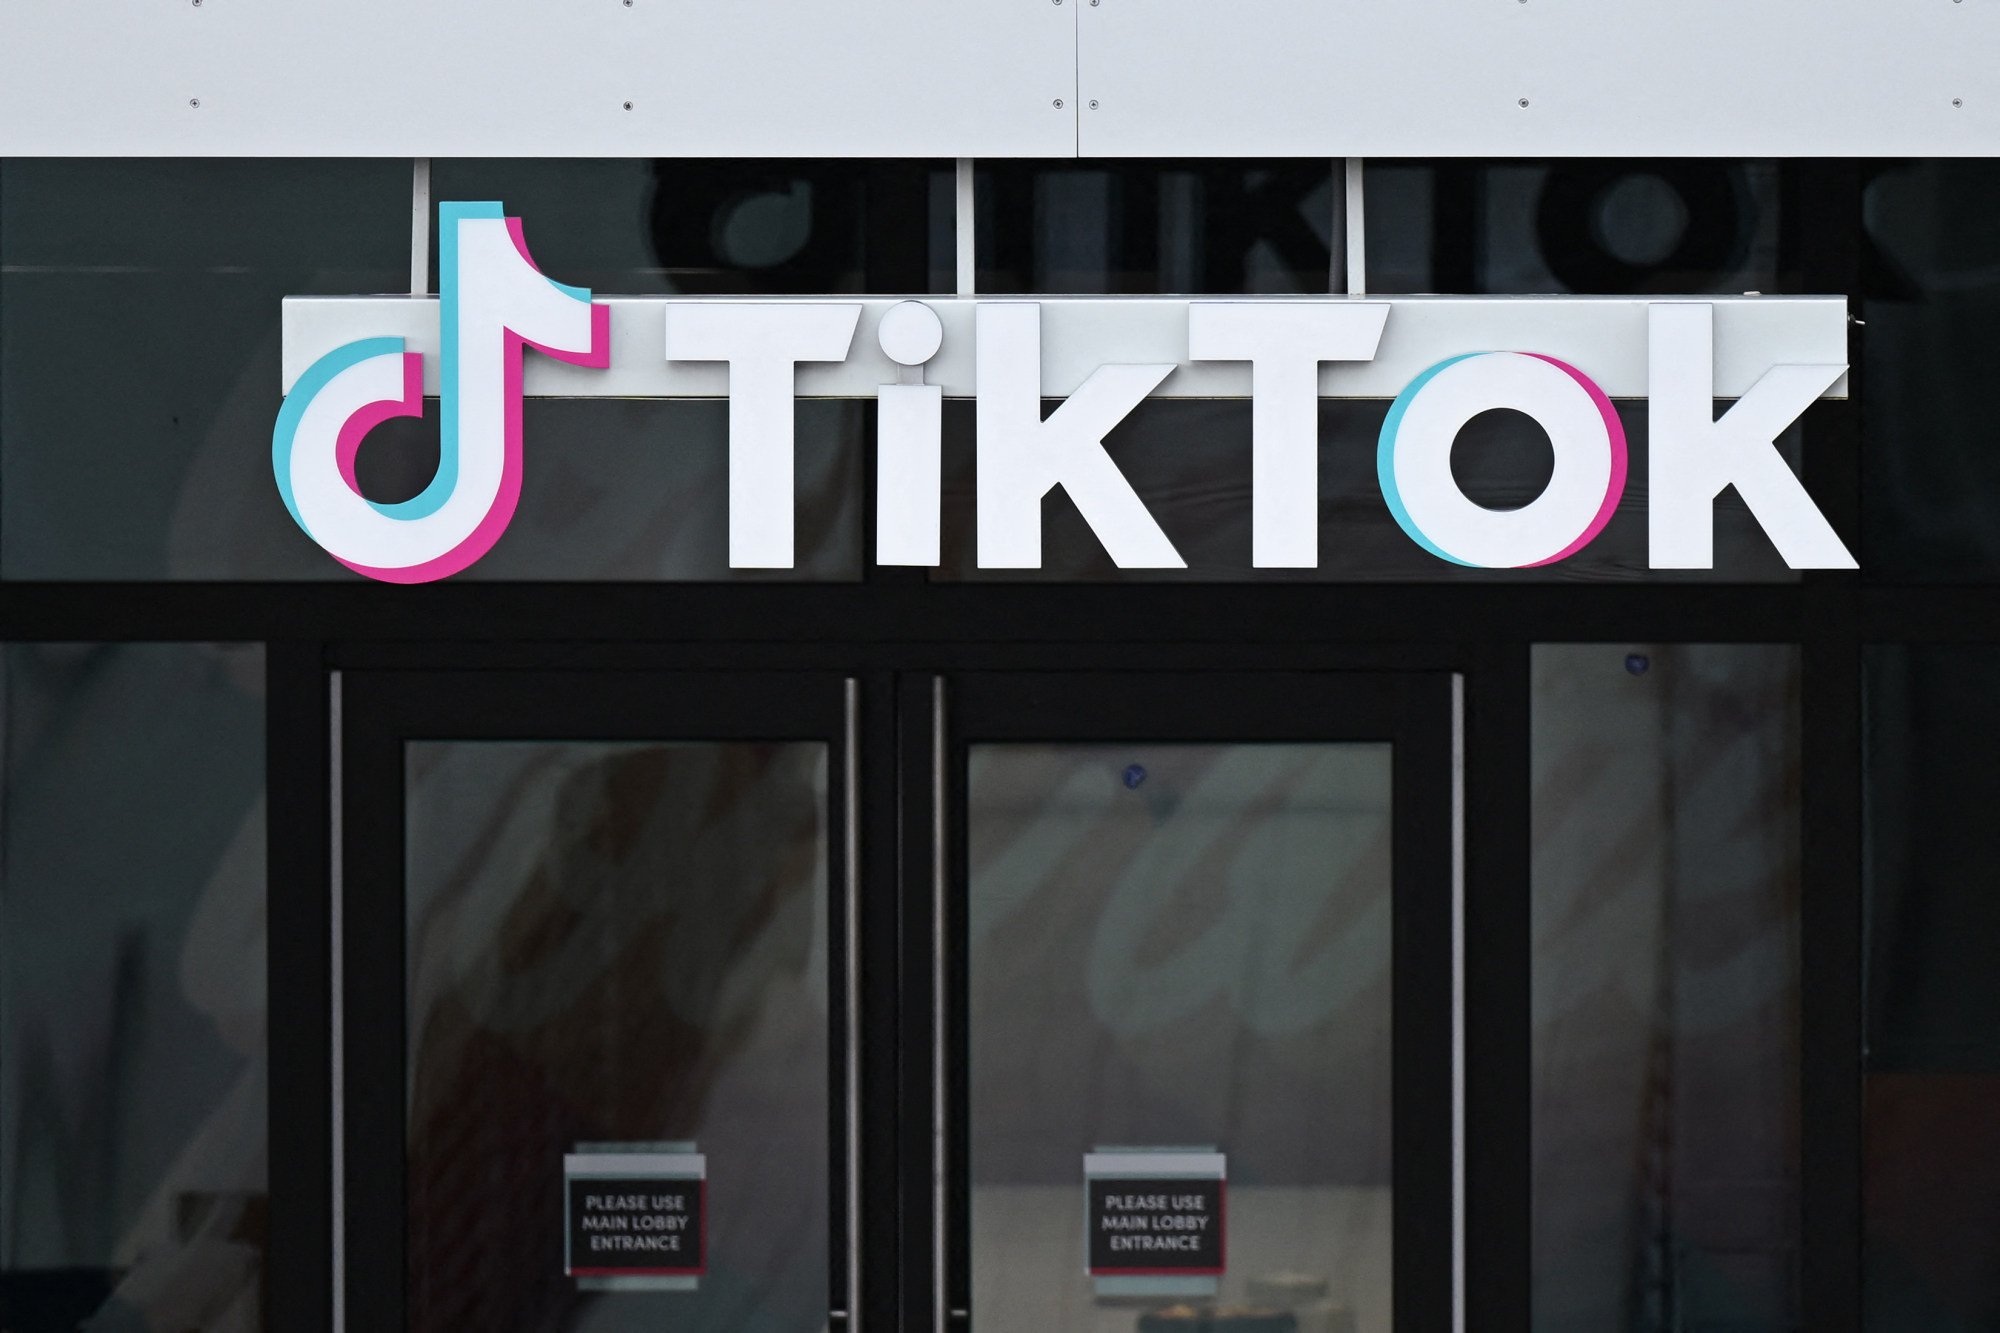 Founder of TikTok owner ByteDance Zhang Yiming makes fresh donation while  keeping a low profile